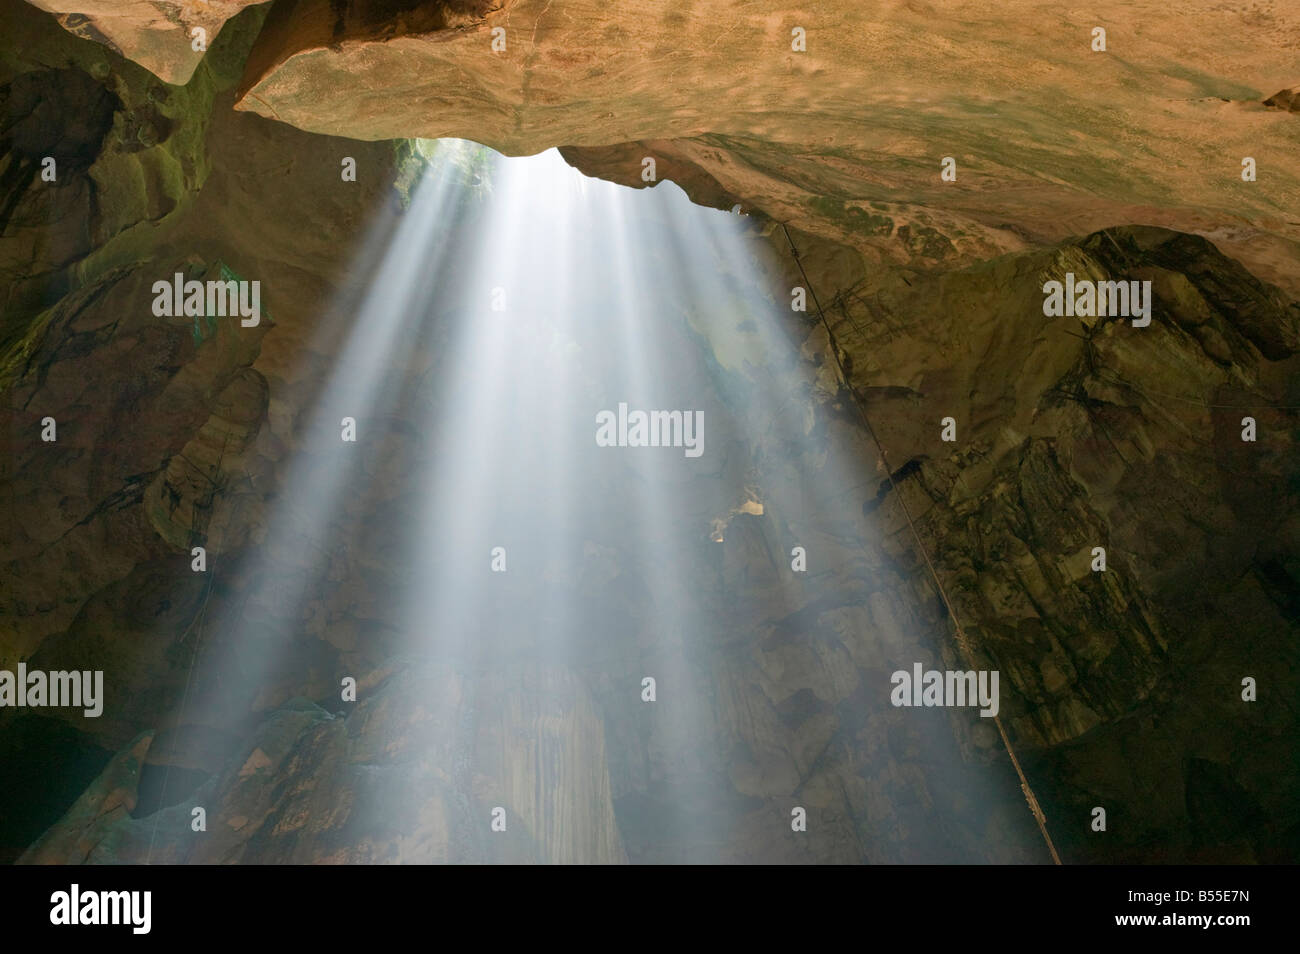 Light pouring into the Great Cave through a sink hole in its roof Niah National Park nr Miri Sarawak Malaysia Stock Photo